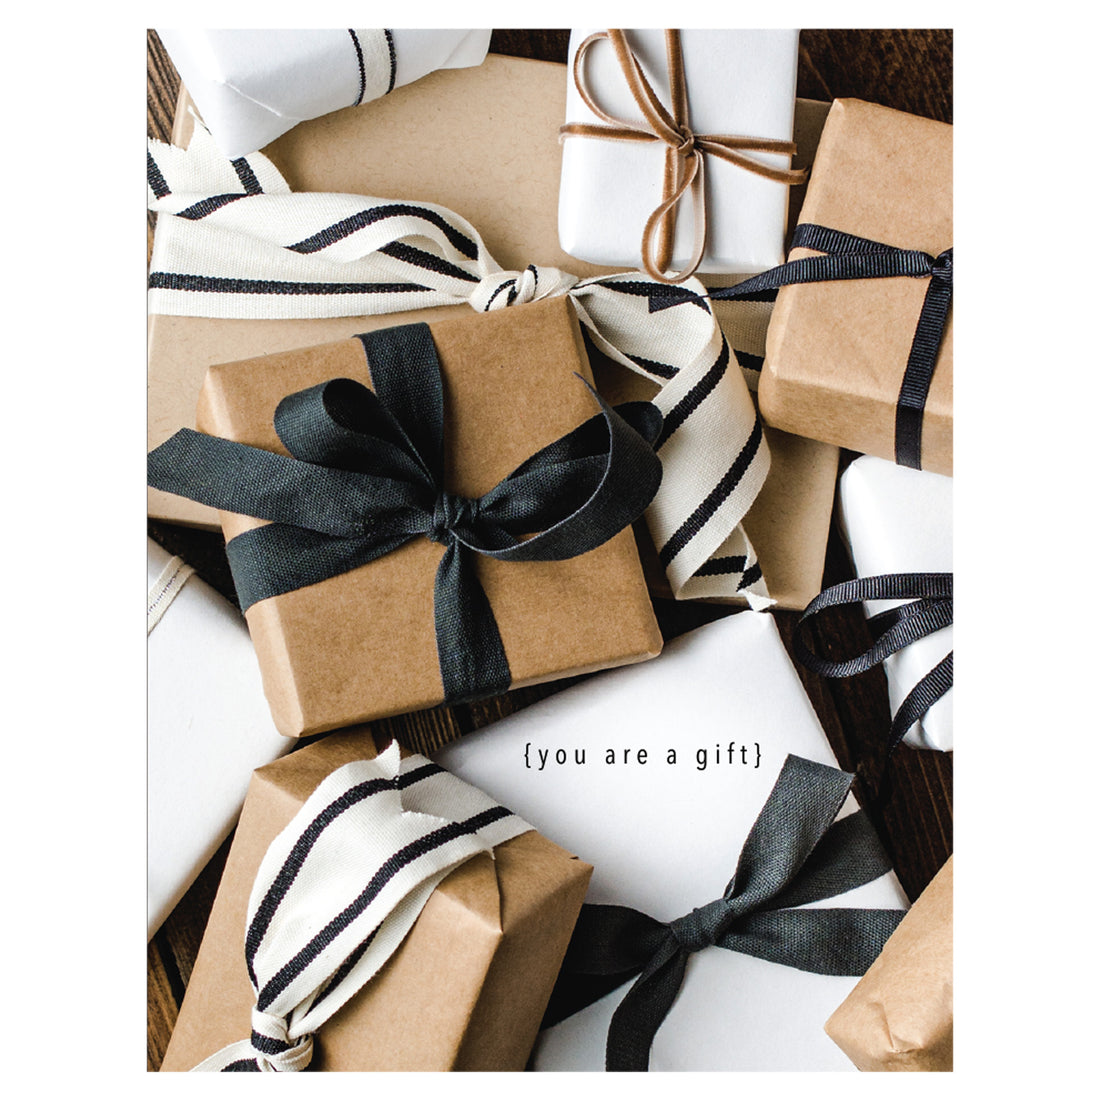 A close-up photo of a pile of simple wrapped gift boxes with ribbon in white, black and tan kraft paper, with &quot;{you are a gift}&quot; printed over a white gift.